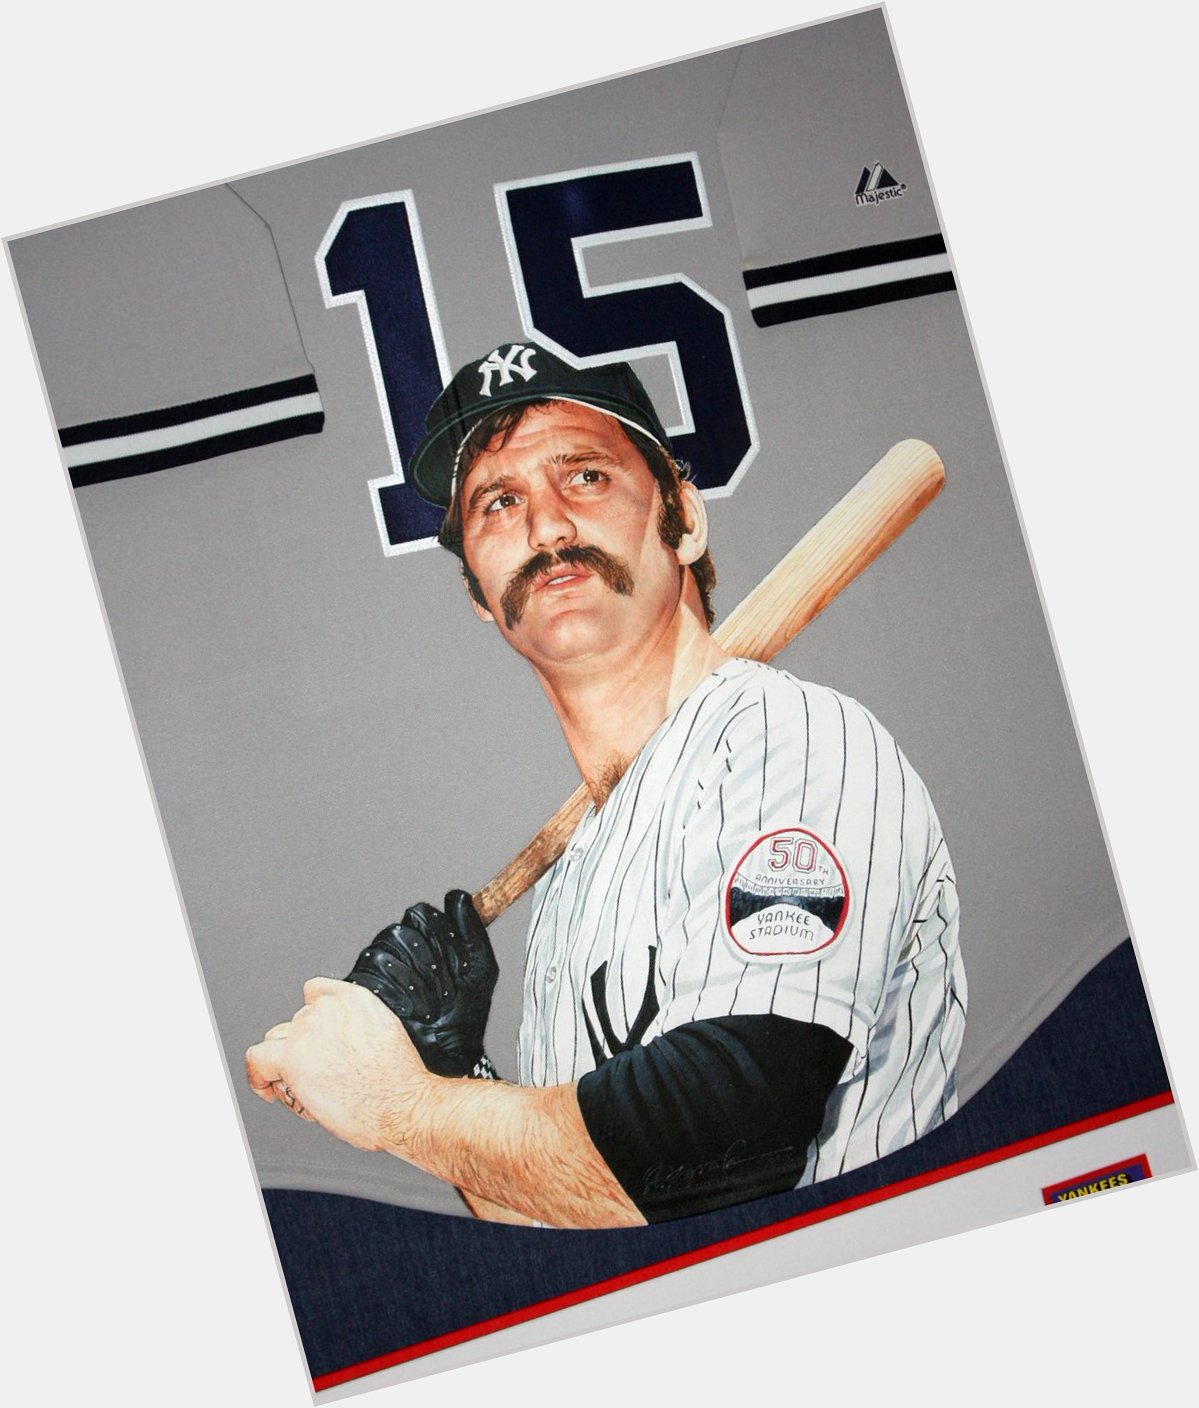 Happy Birthday to Thurman Munson, who would have turned 70 today! 